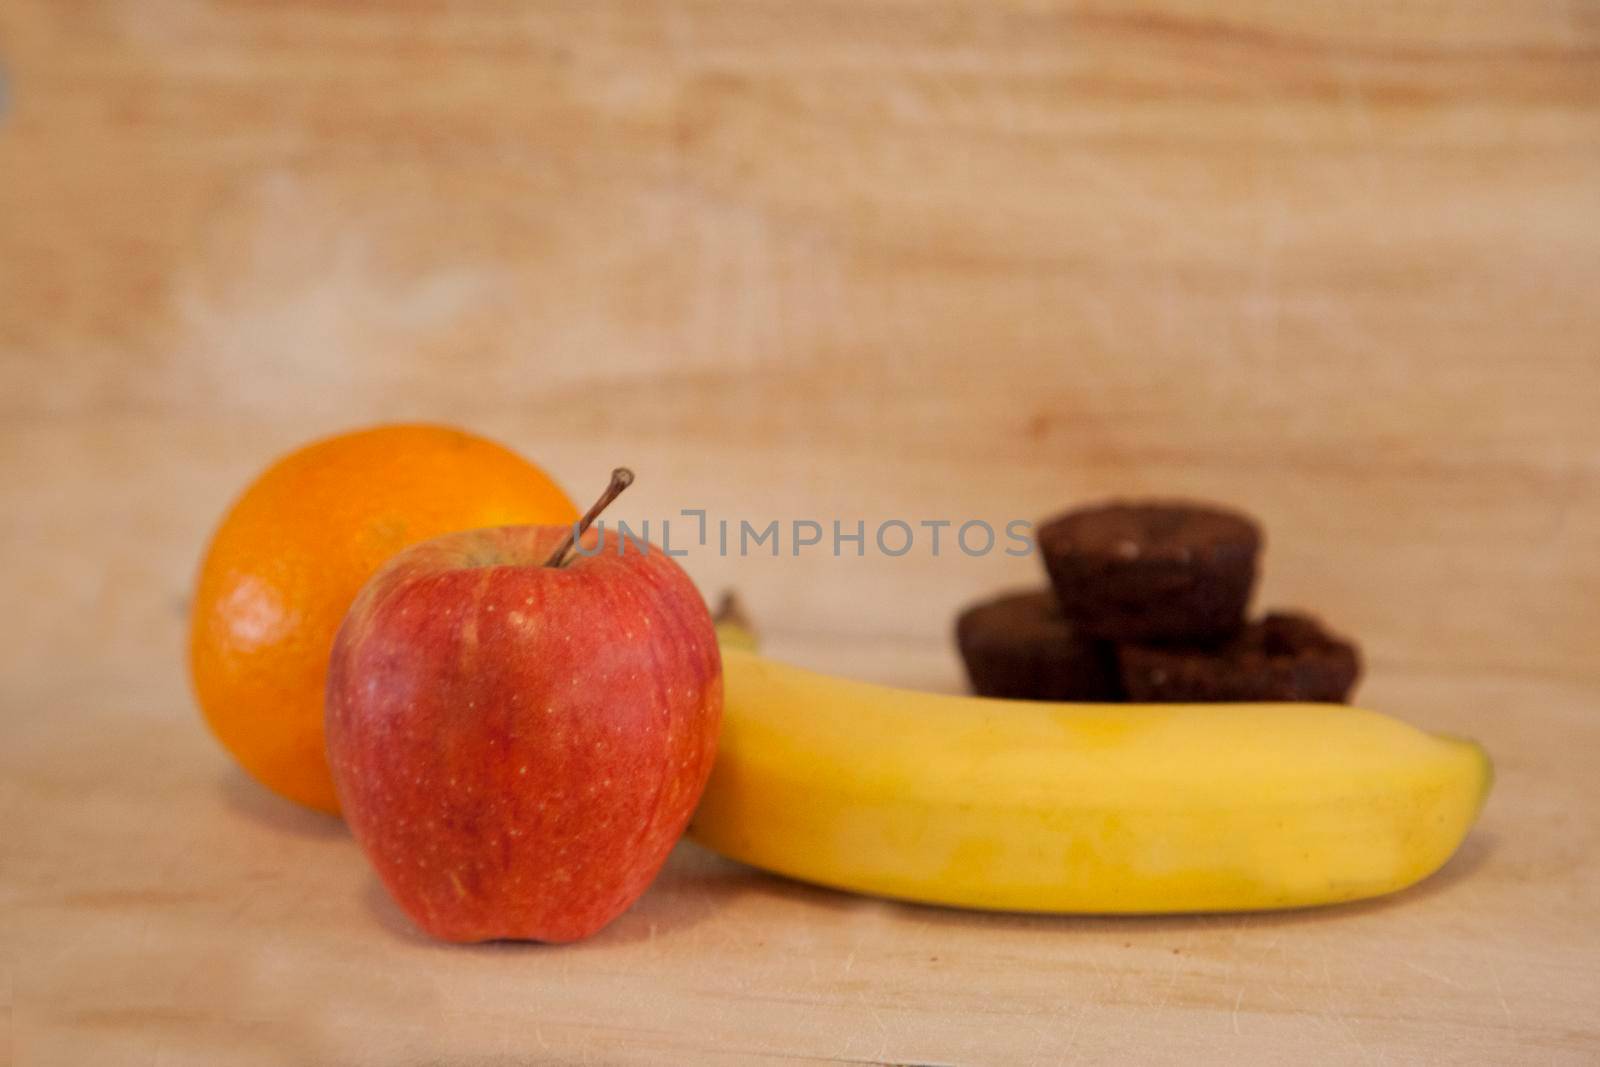 Choosing between apple, banana and orange or some small bite sized brownies